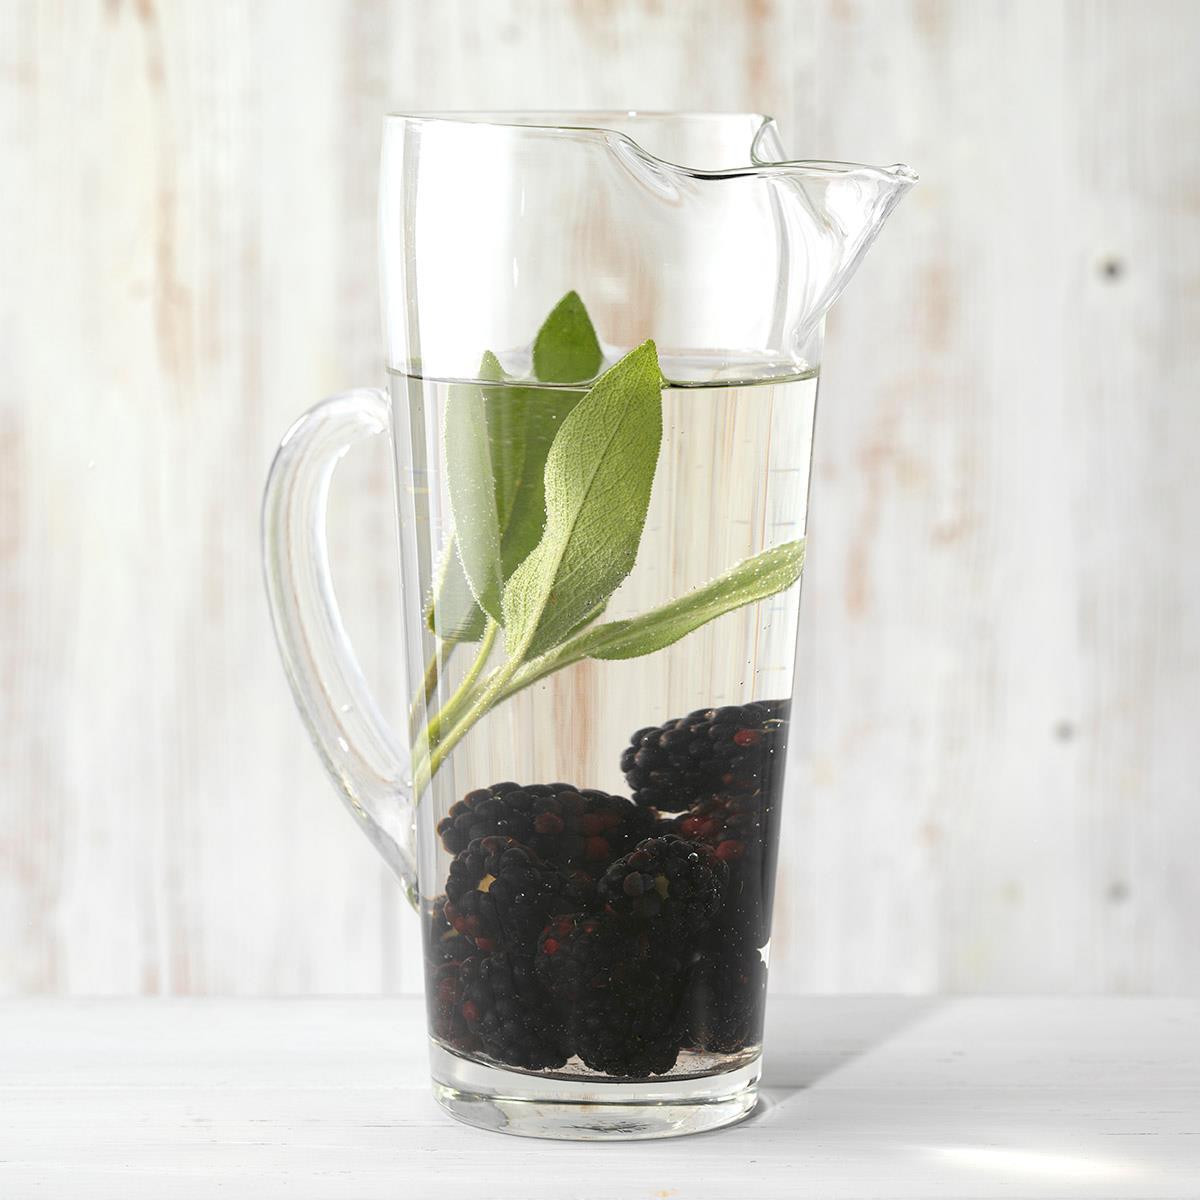 Blackberry and Sage Infused Water Recipe: How to Make It